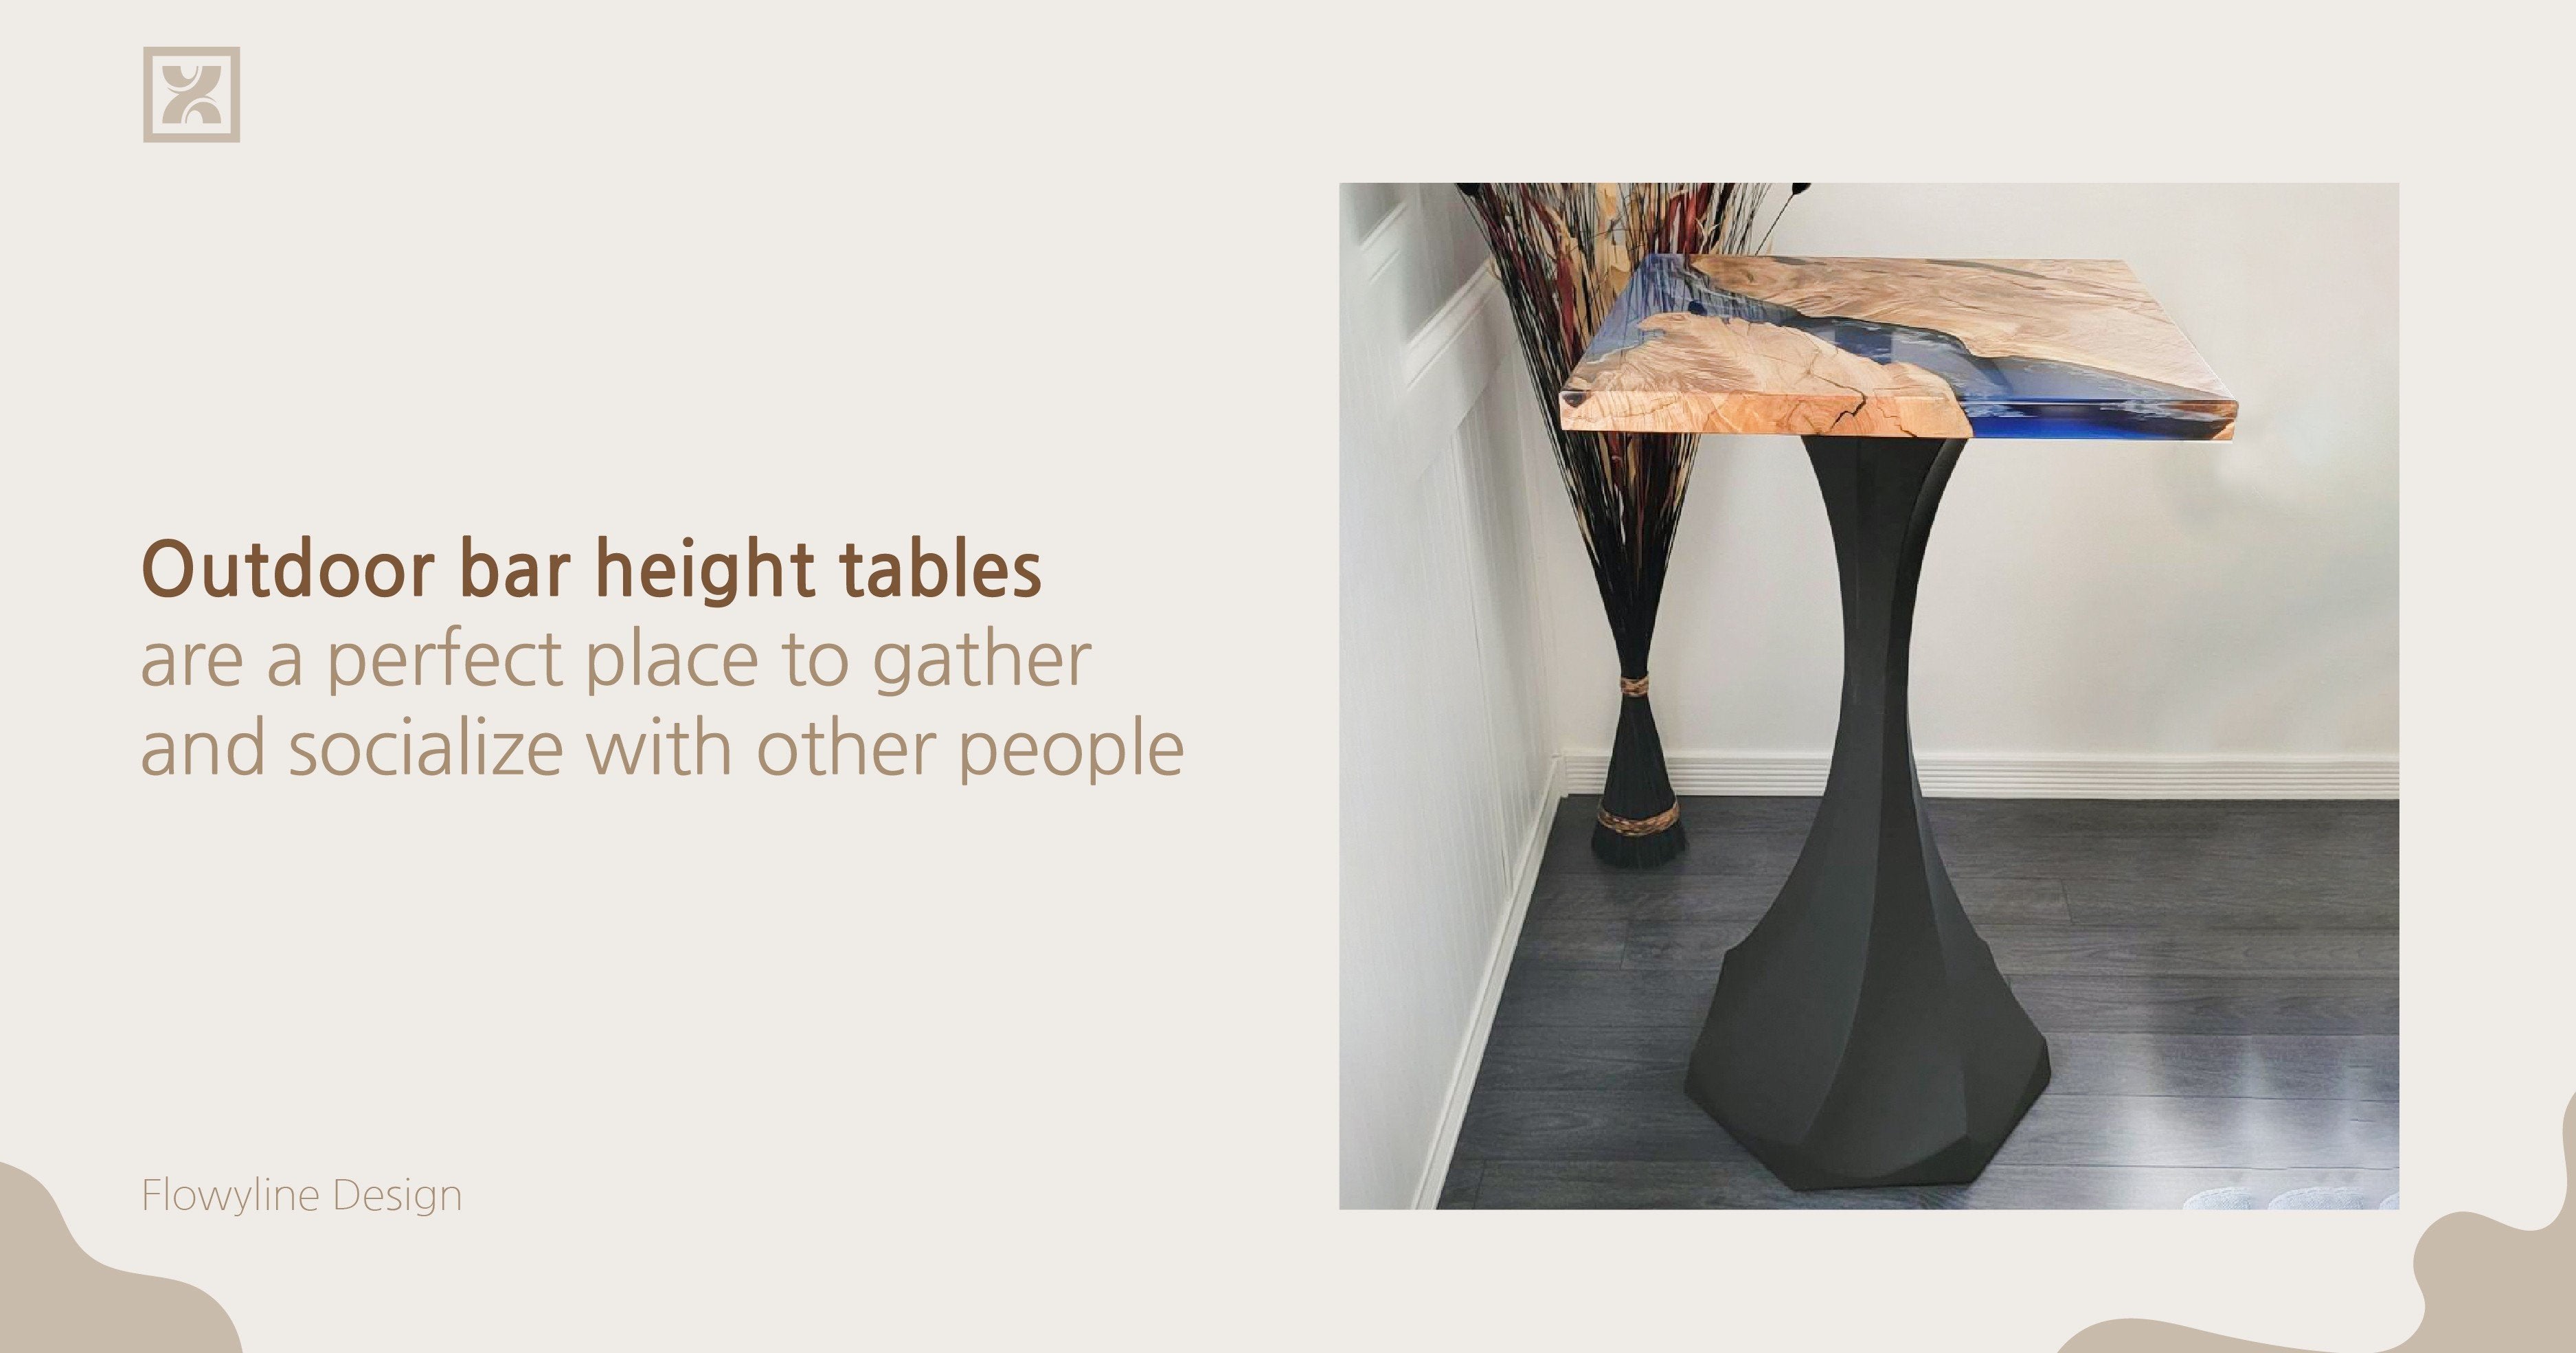 Outdoor bar height tables are a perfect place to gather and socialize with other people